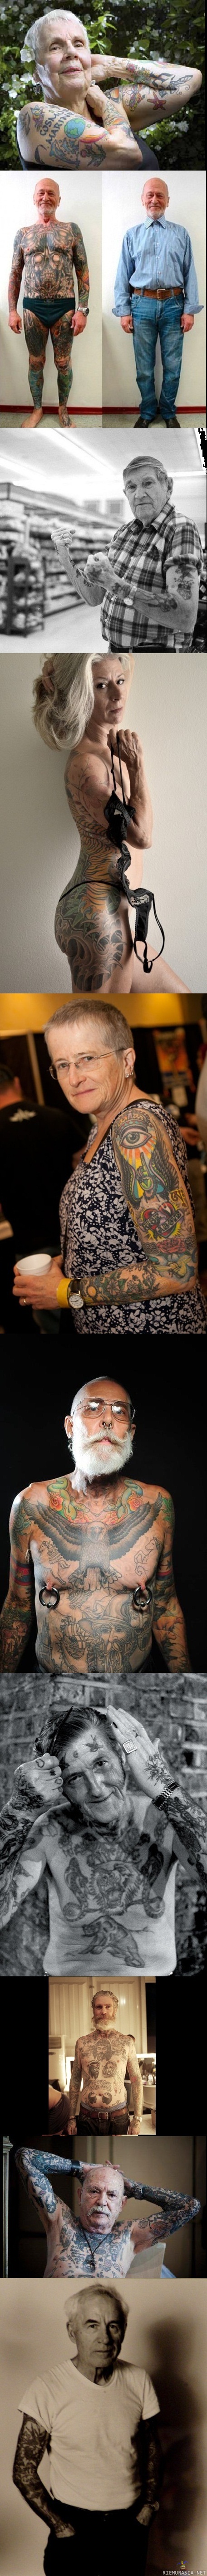 &#34;What about when you get old?&#34; - Tattooed Seniors answer